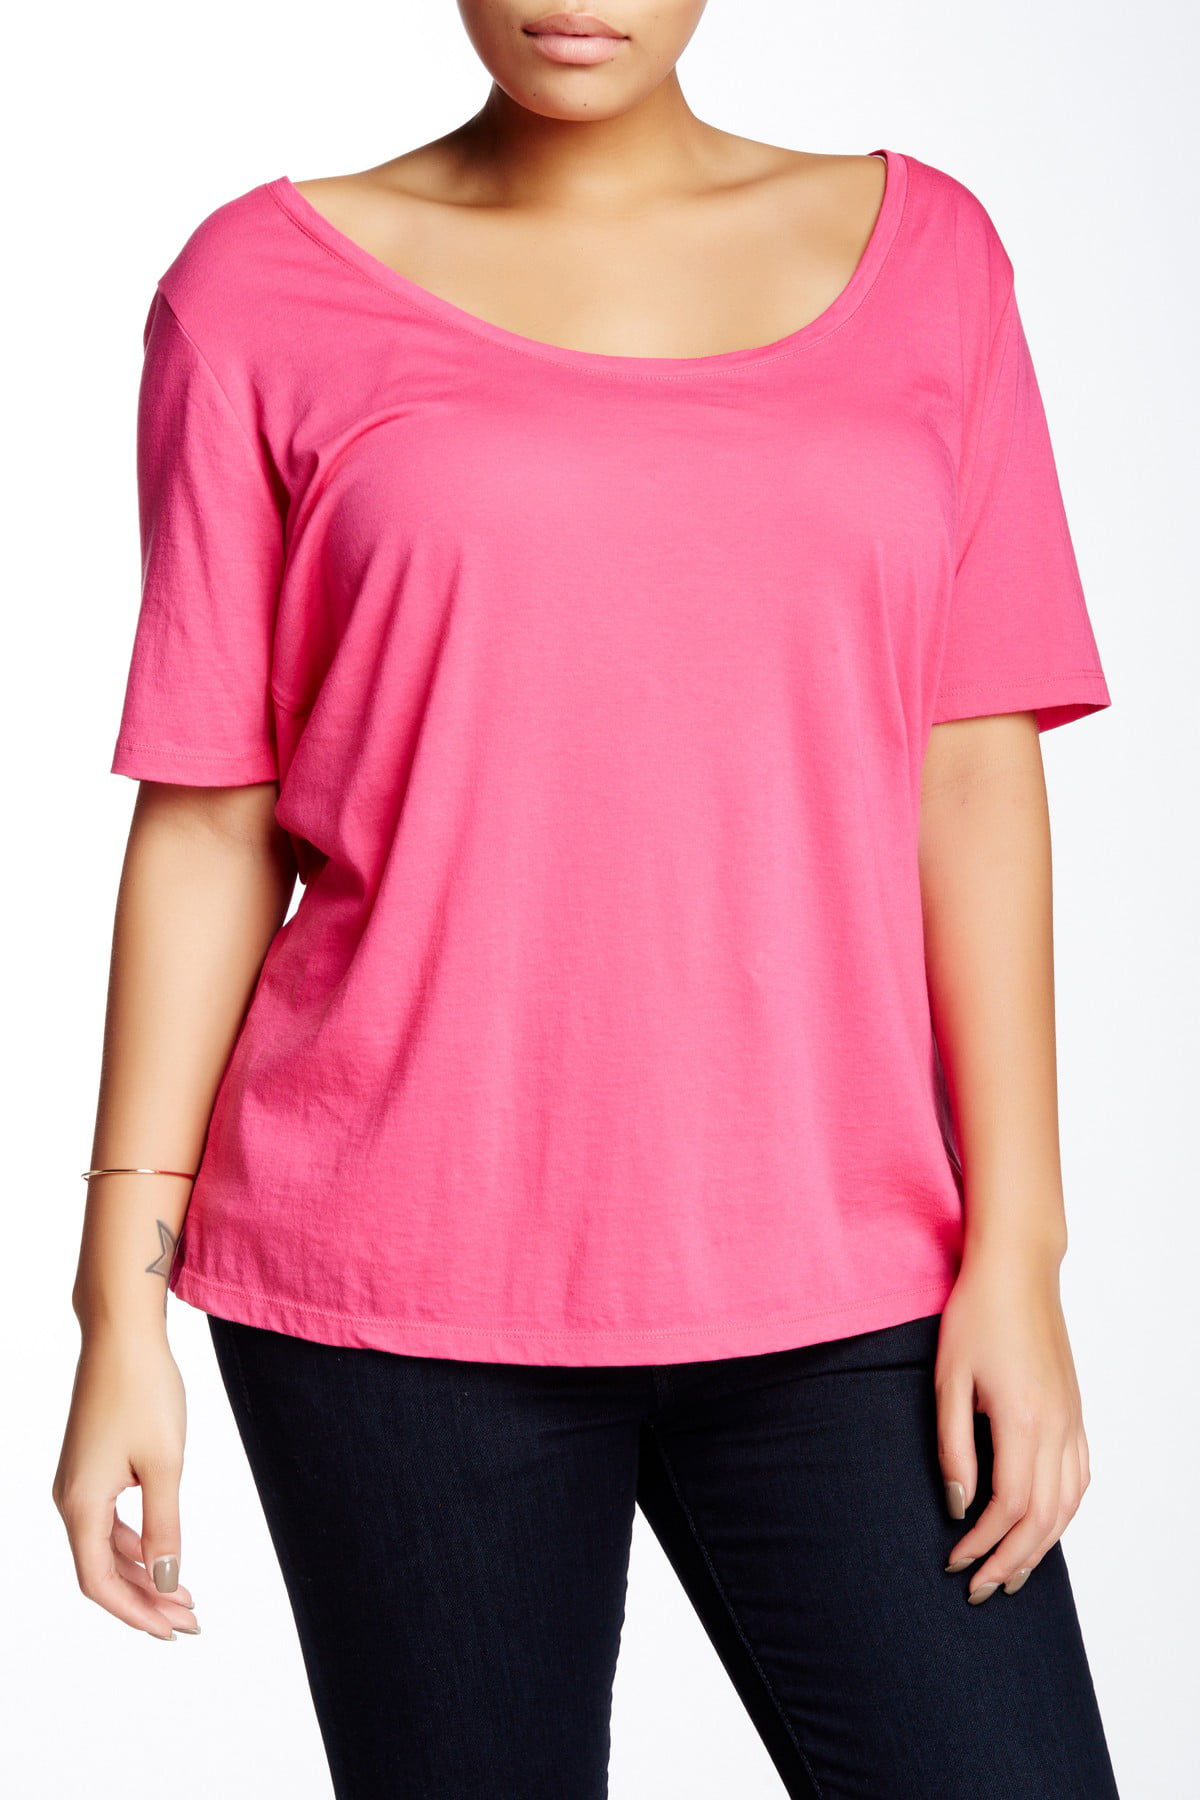 Susina - Susina NEW Pink Rouge Womens Size 3X Plus Scoop Neck Tee T ...